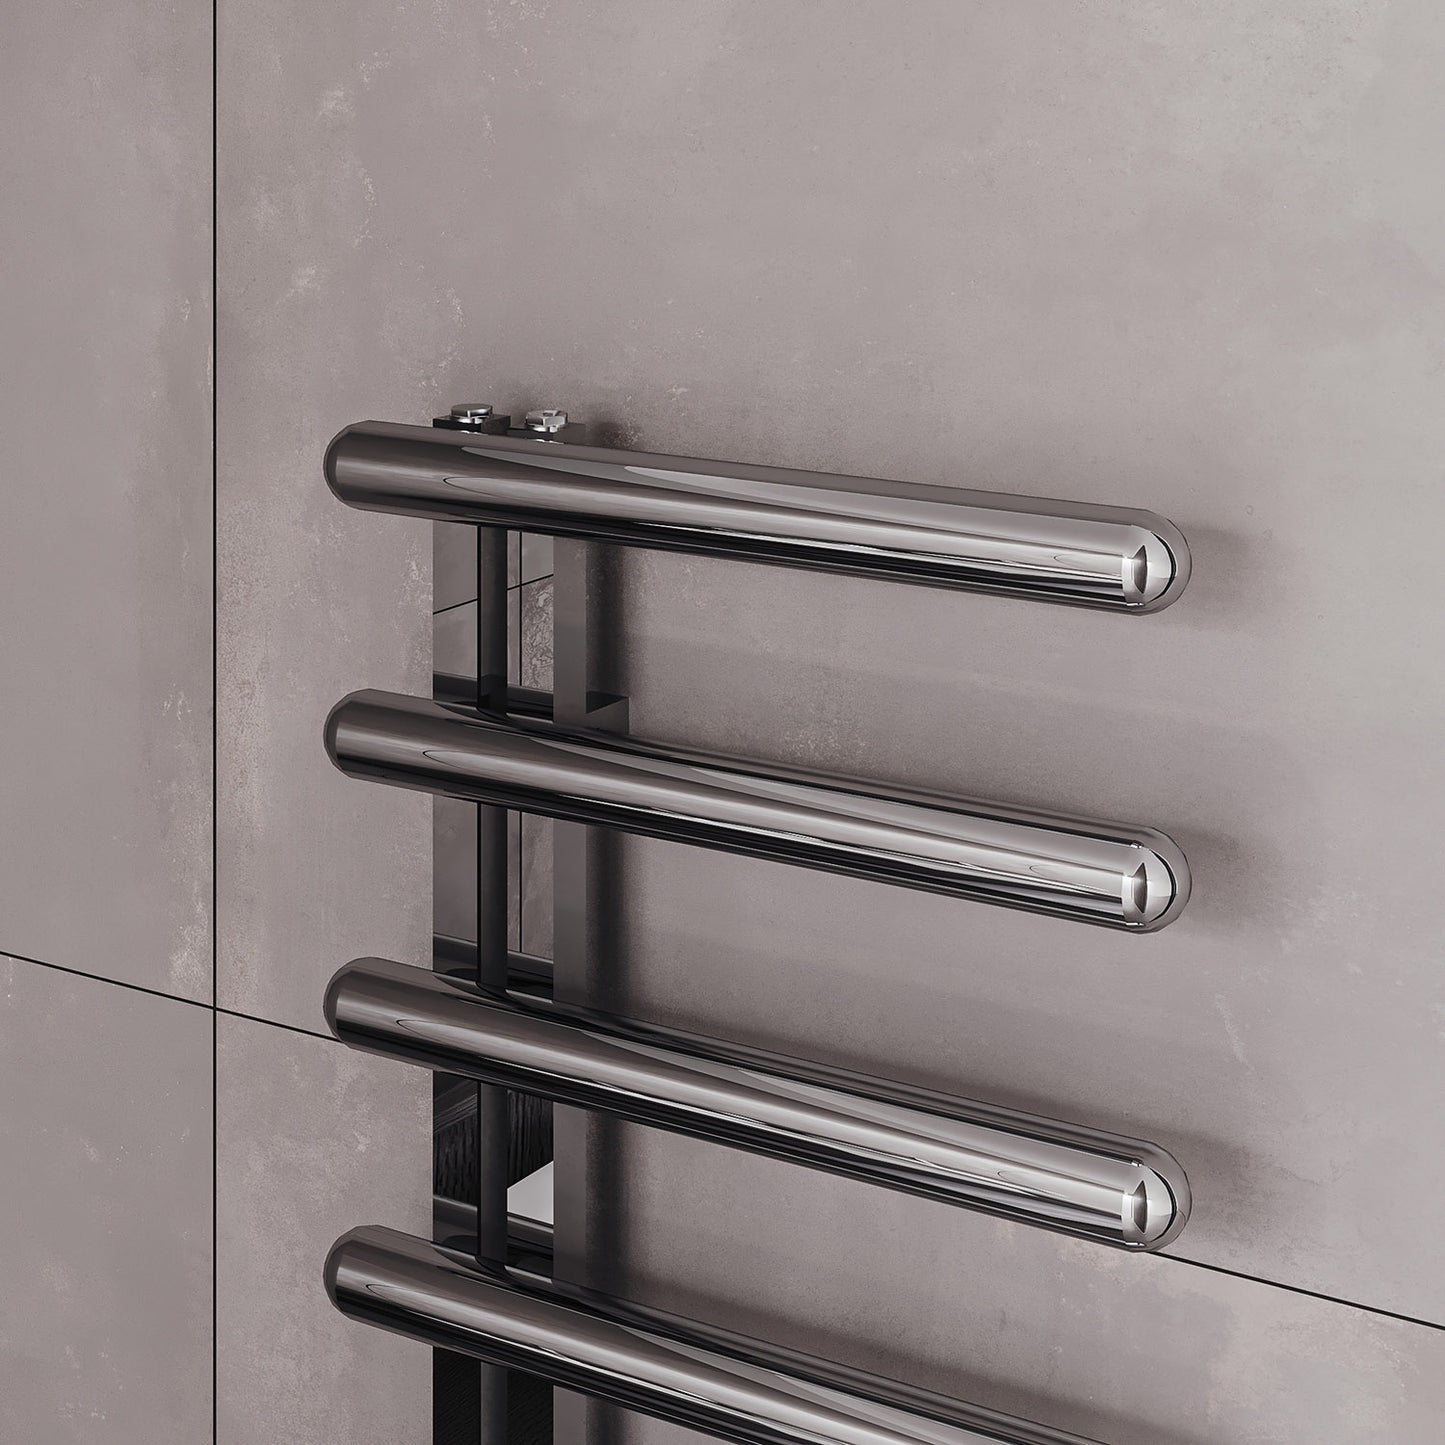 Ivor Stainless Steel Heated Towel Rail - Various Colours + Sizes